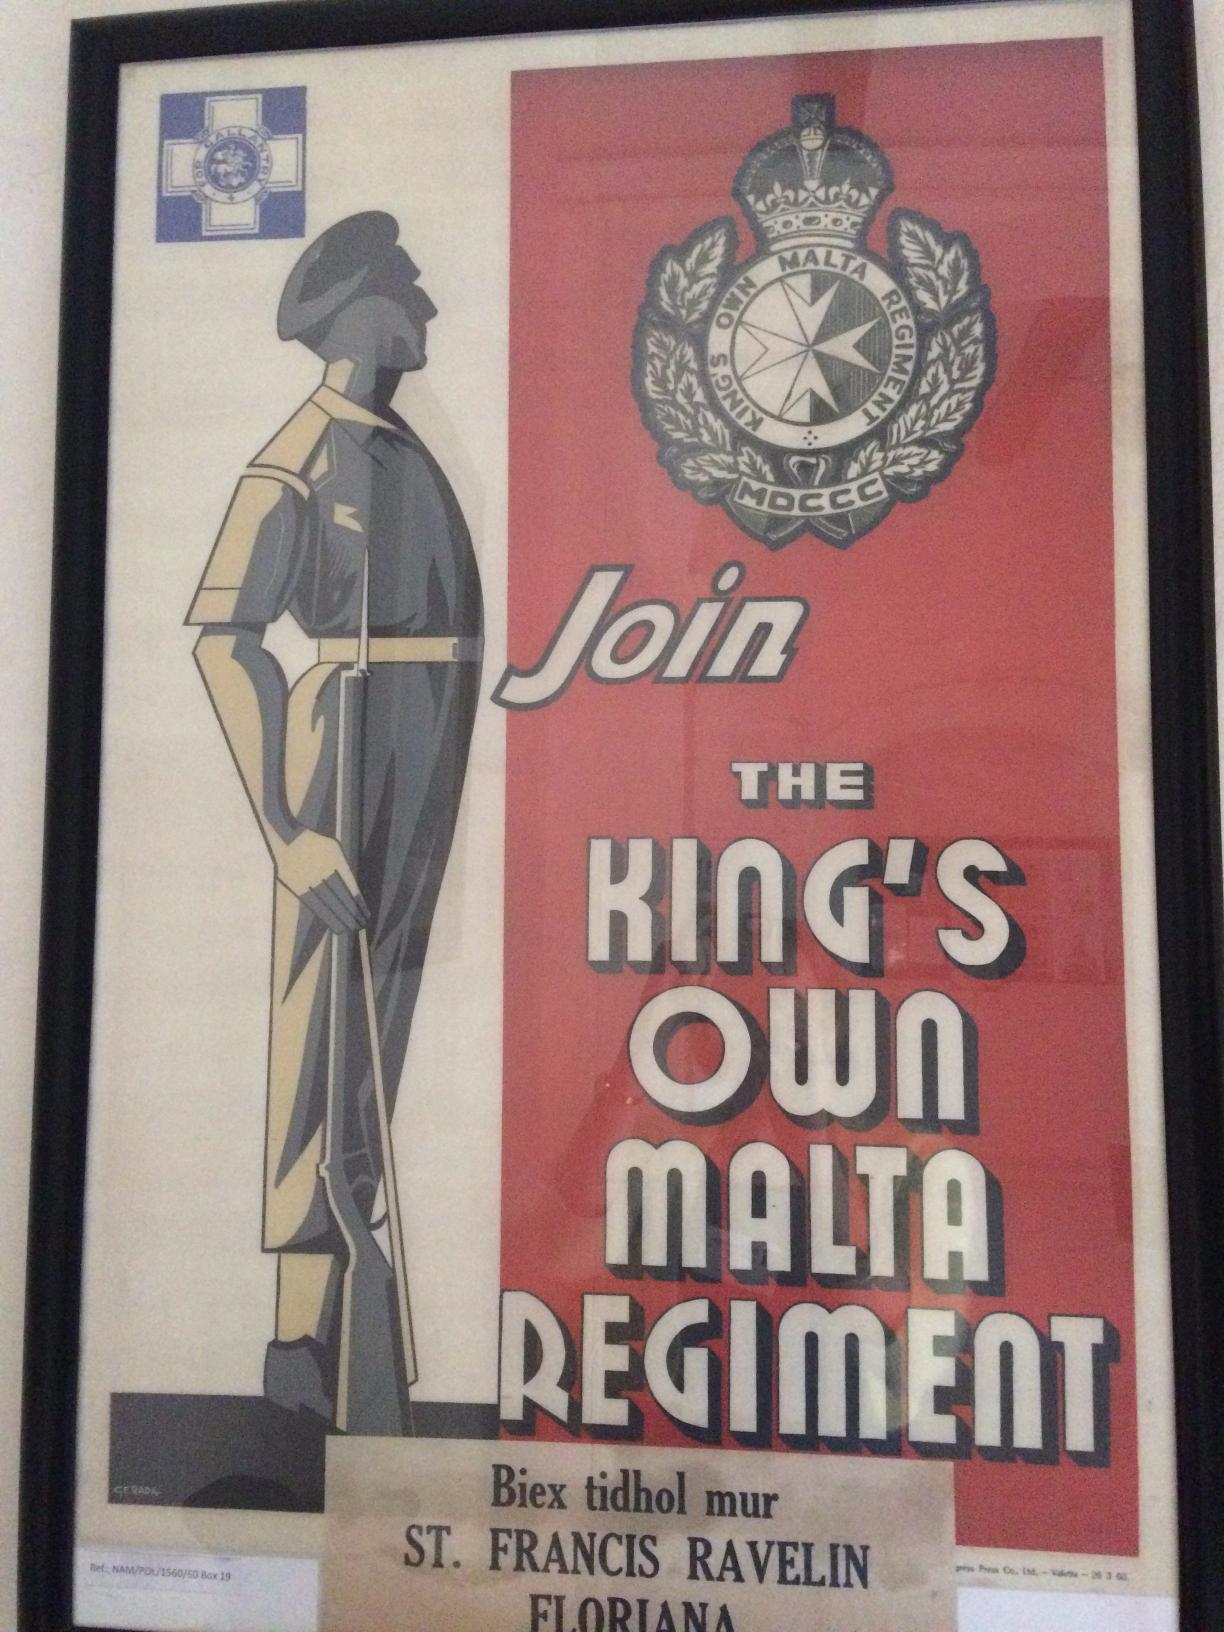 Recruiting poster on display in the National Archives